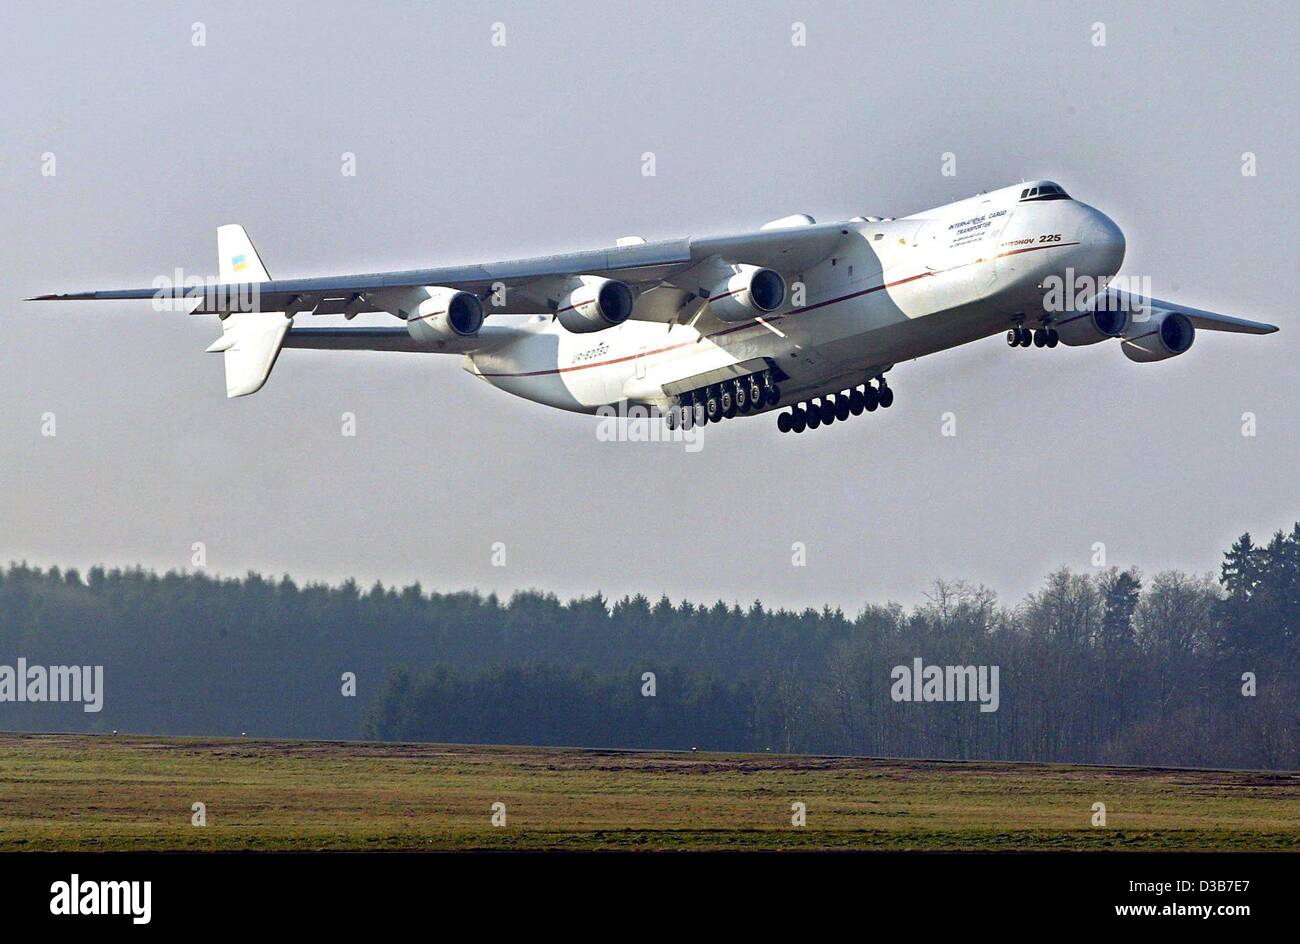 (dpa) - The world's largest cargo airplane, the Russian Antonov An 225, takes off from the airport in Frankfurt Hahn, Germany, 8 December 2002. The plane can carry freights of up to 640 tons. There is only one plane of the type Antonov An 225 worldwide. Stock Photo